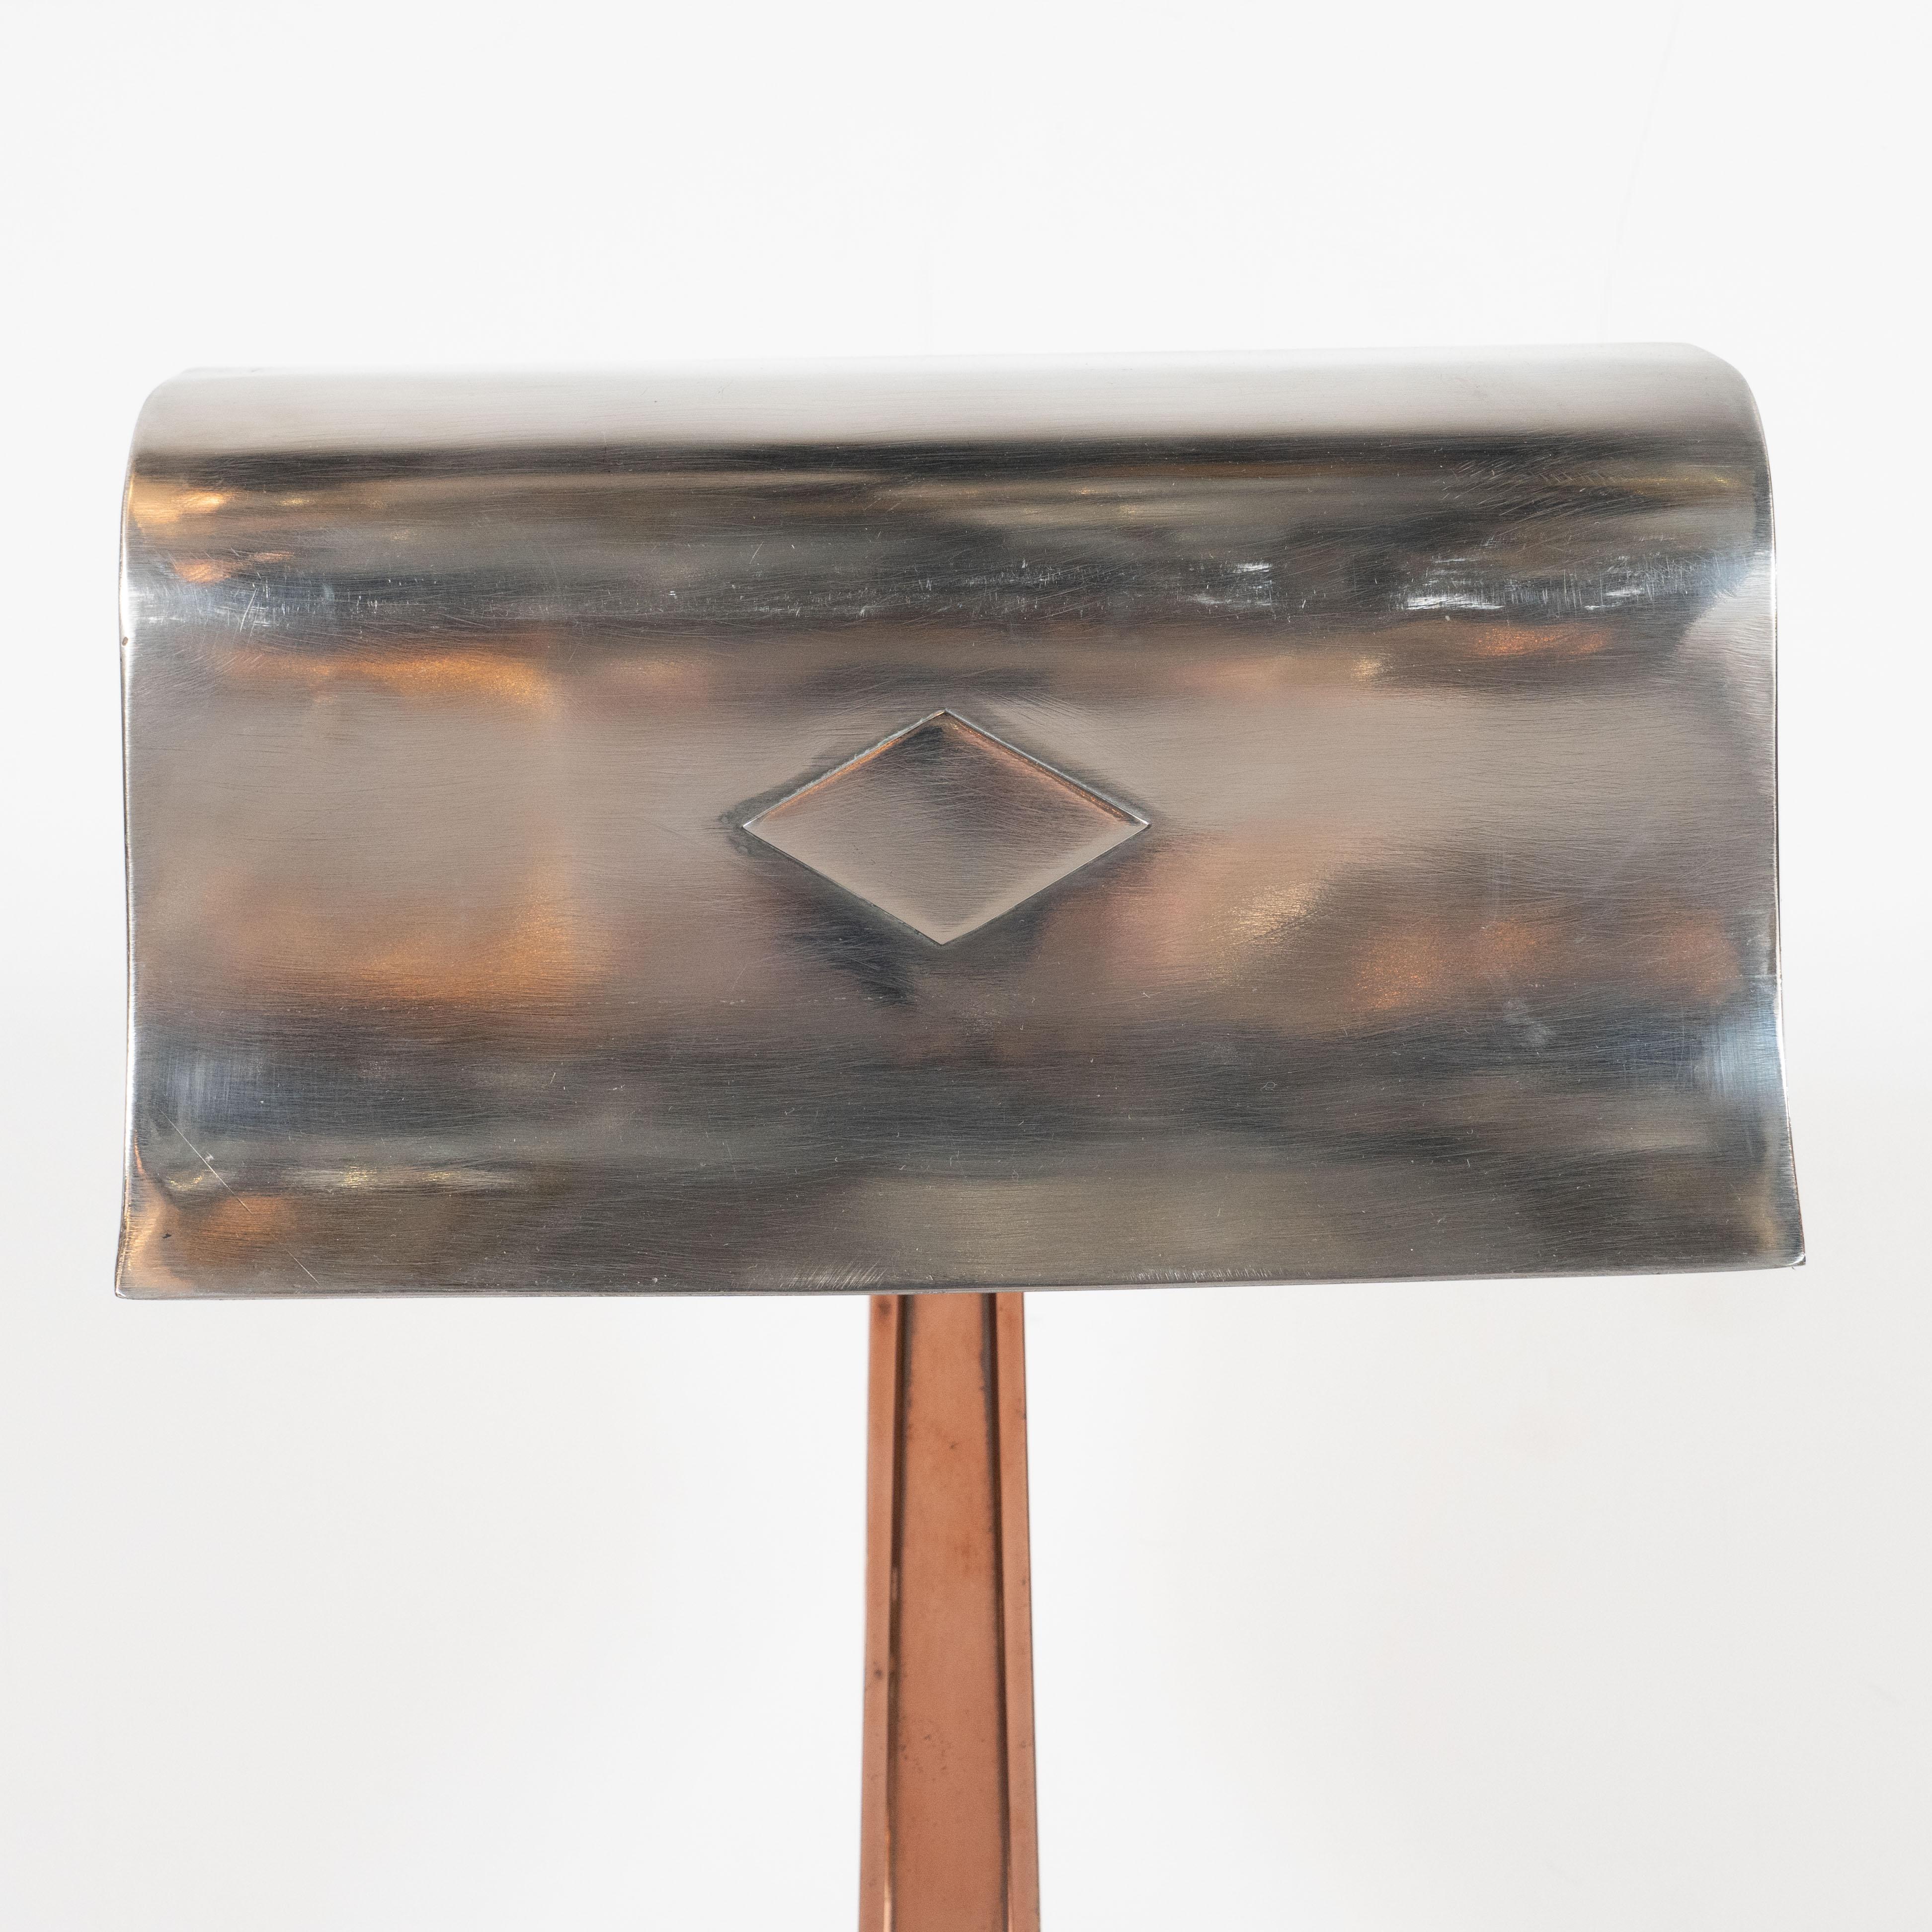 Early Art Deco Copper & Polished Aluminum Table Lamp with Cubist Embellishment For Sale 1